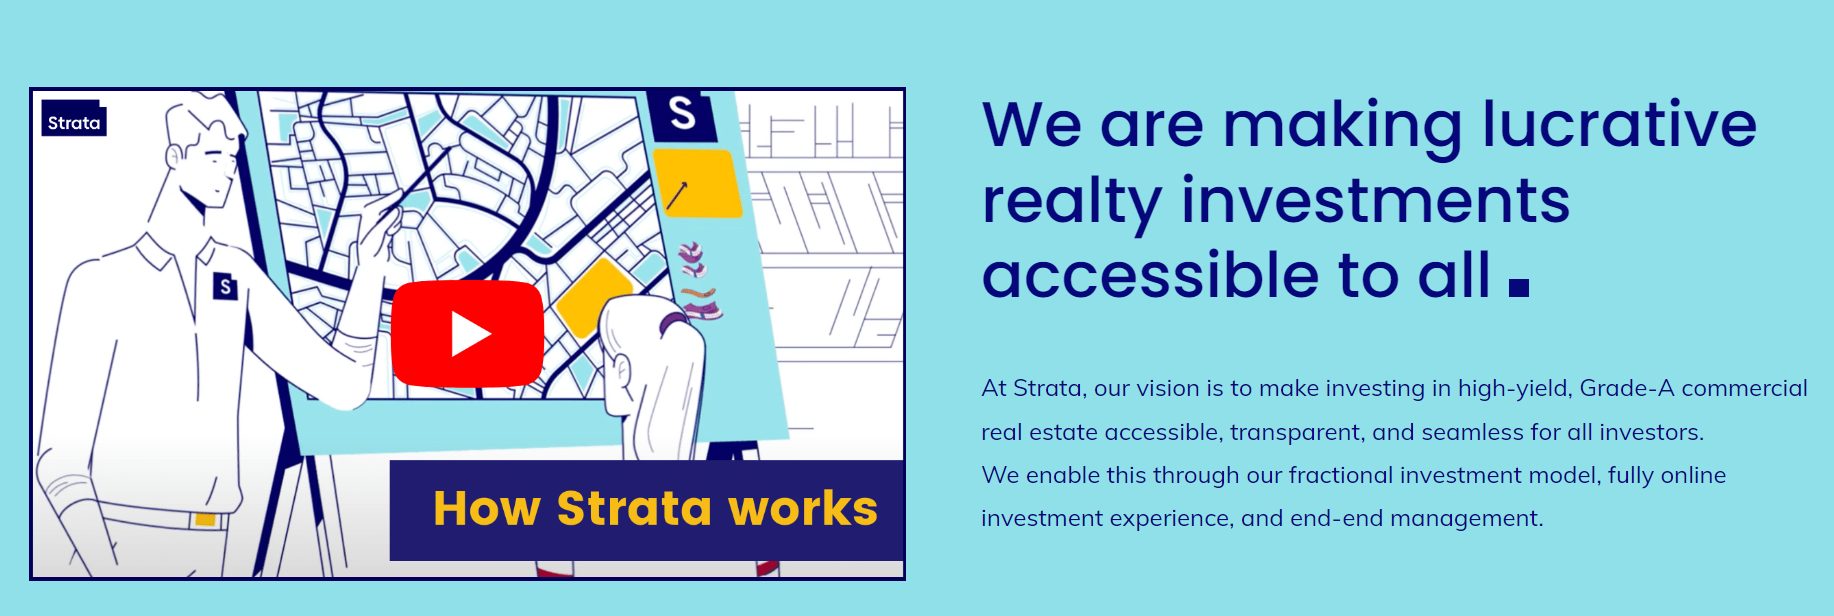 strata-launches-new-grade-a-office-asset-opportunity-in-chennai-aims-to-raise-inr-27-crore-from-investors